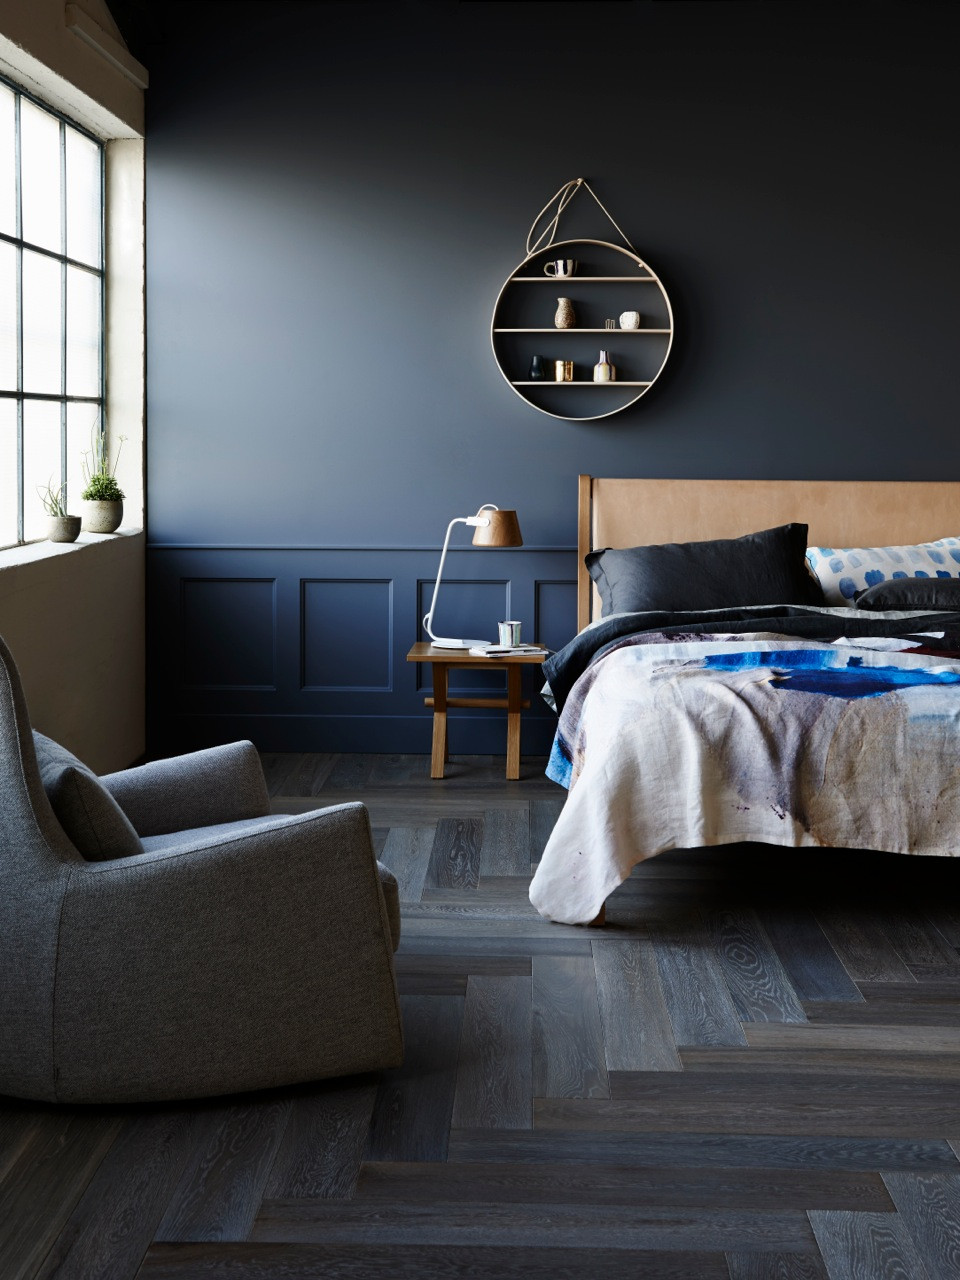 Bedroom Blue Walls
 Daring to go dark How to bring a designer edge to your home